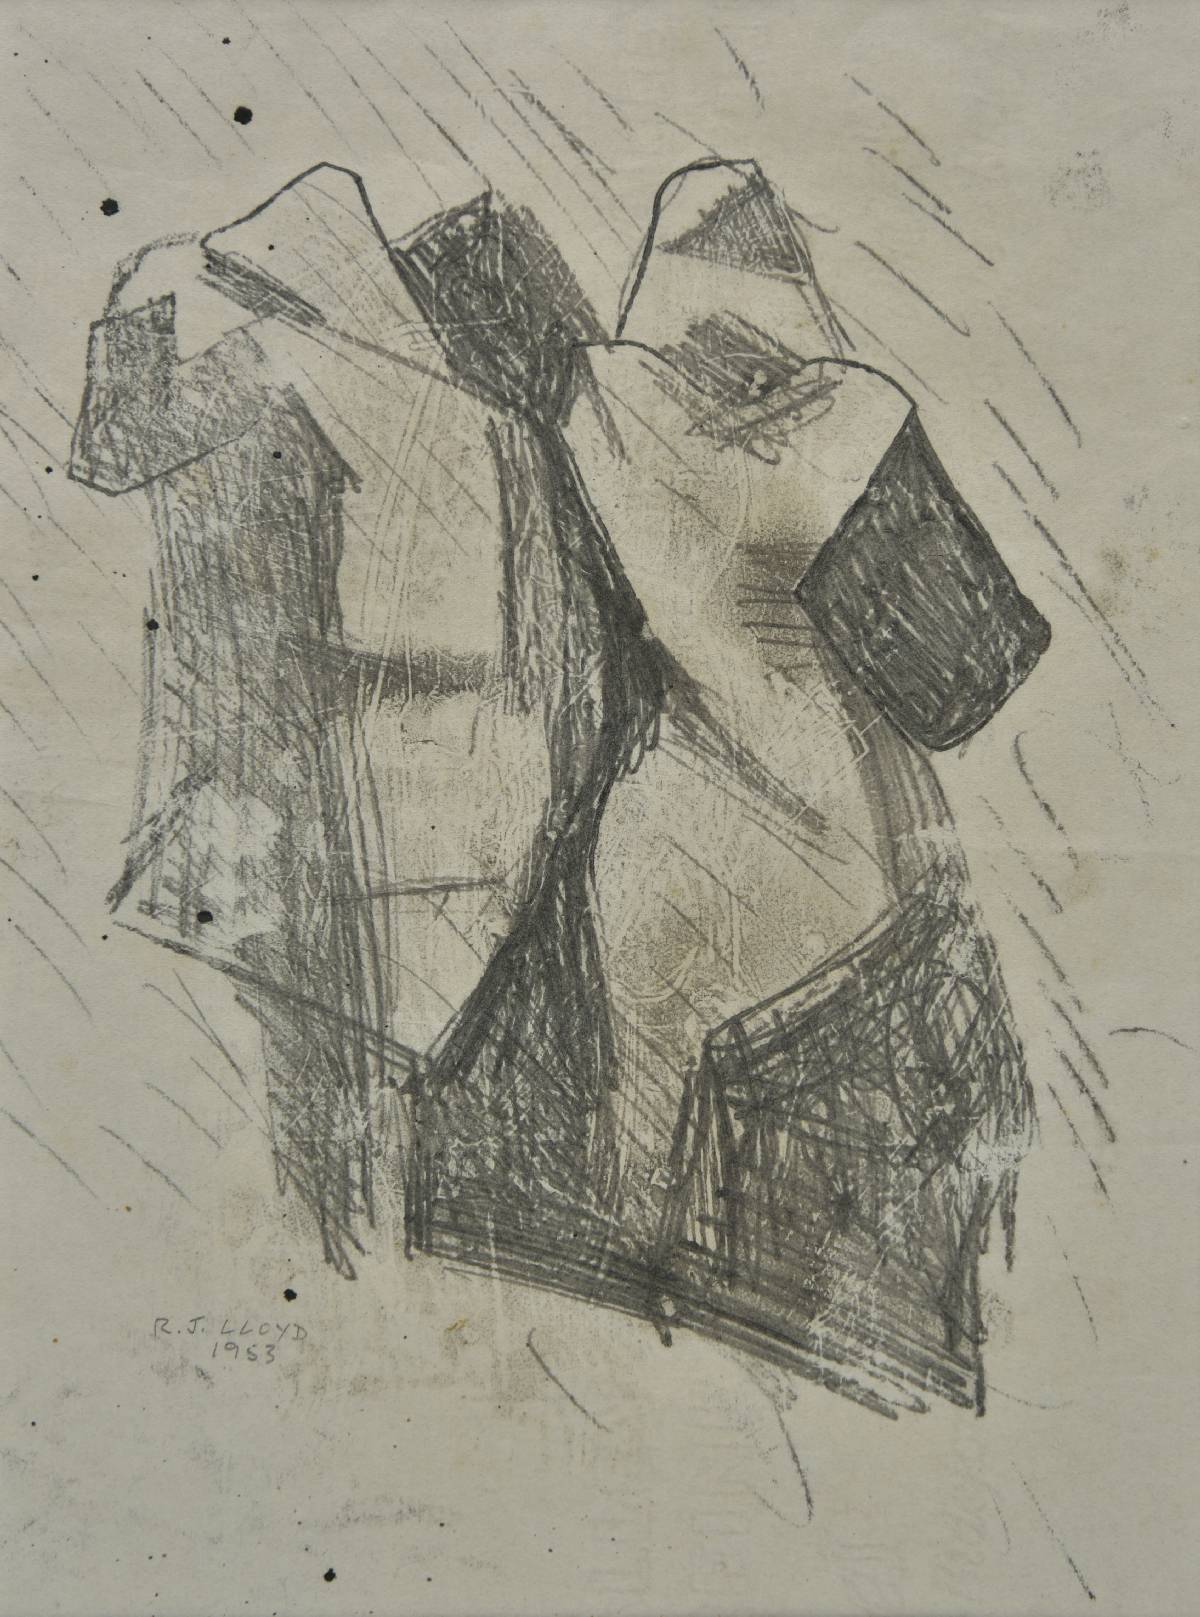 *Lloyd (Reginald J., 1926- ). Rain, 1953, monotype on paper, signed and dated lower left, 25 x 18. - Image 2 of 2